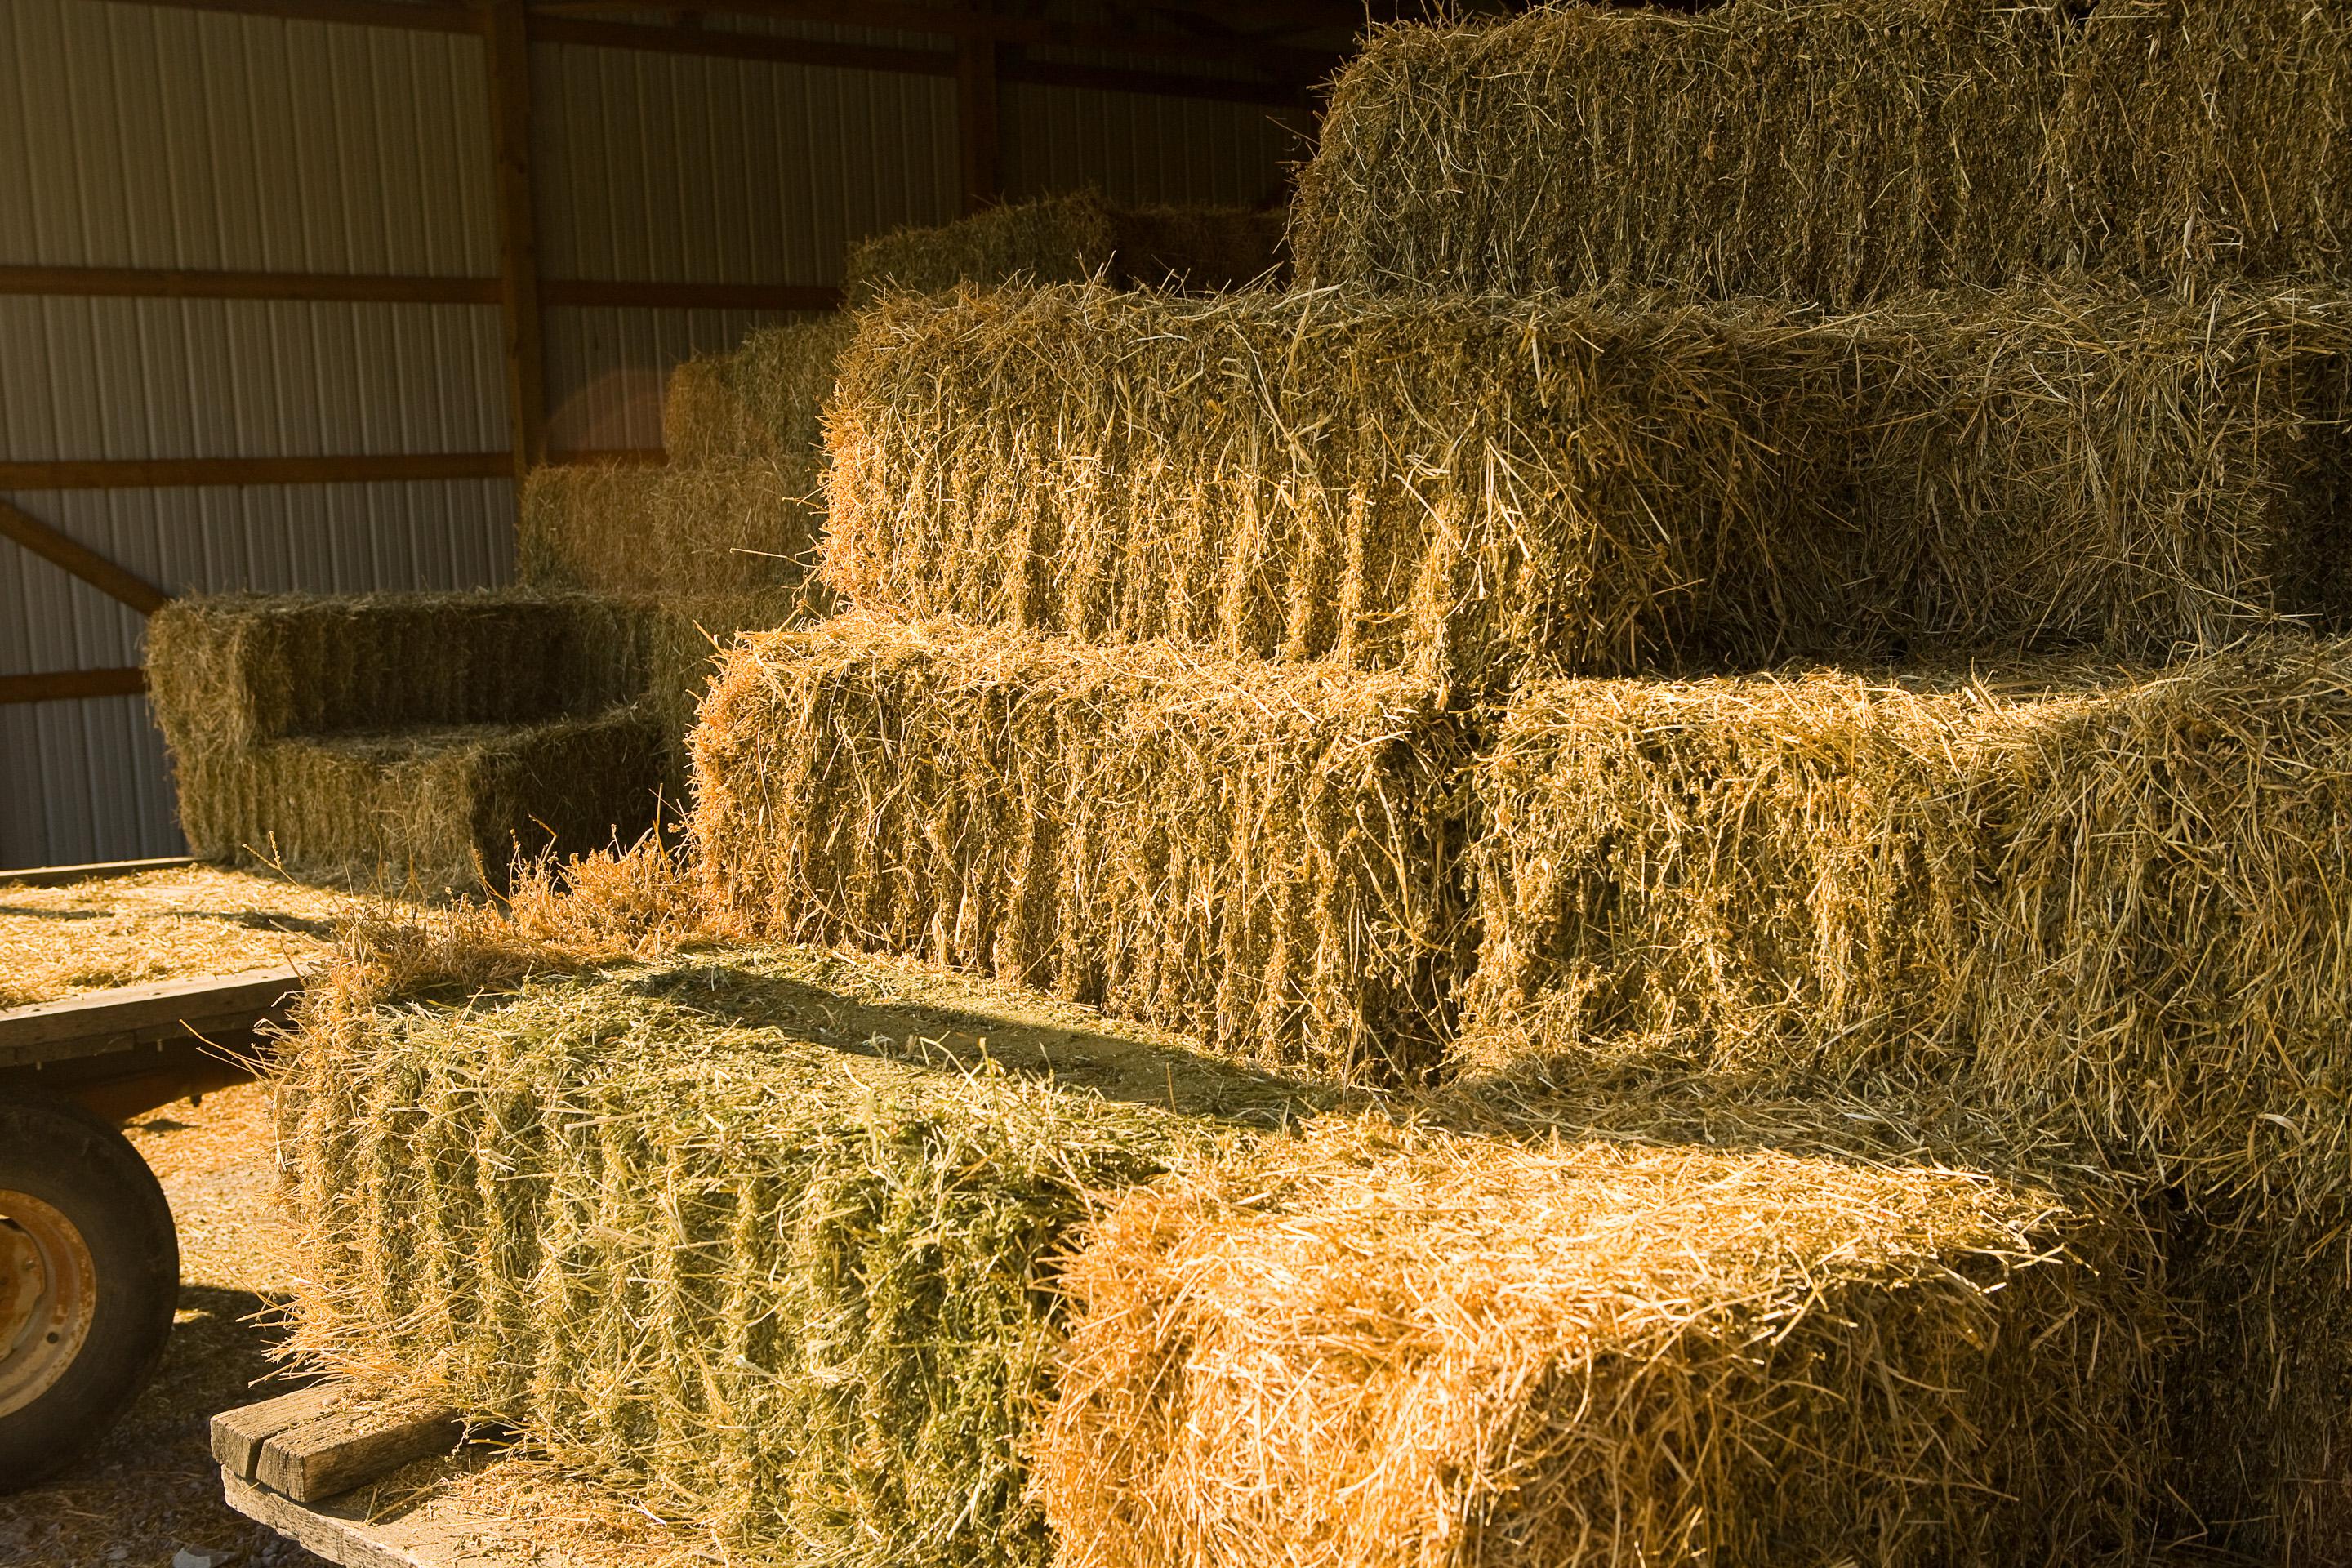 Stacks of hay